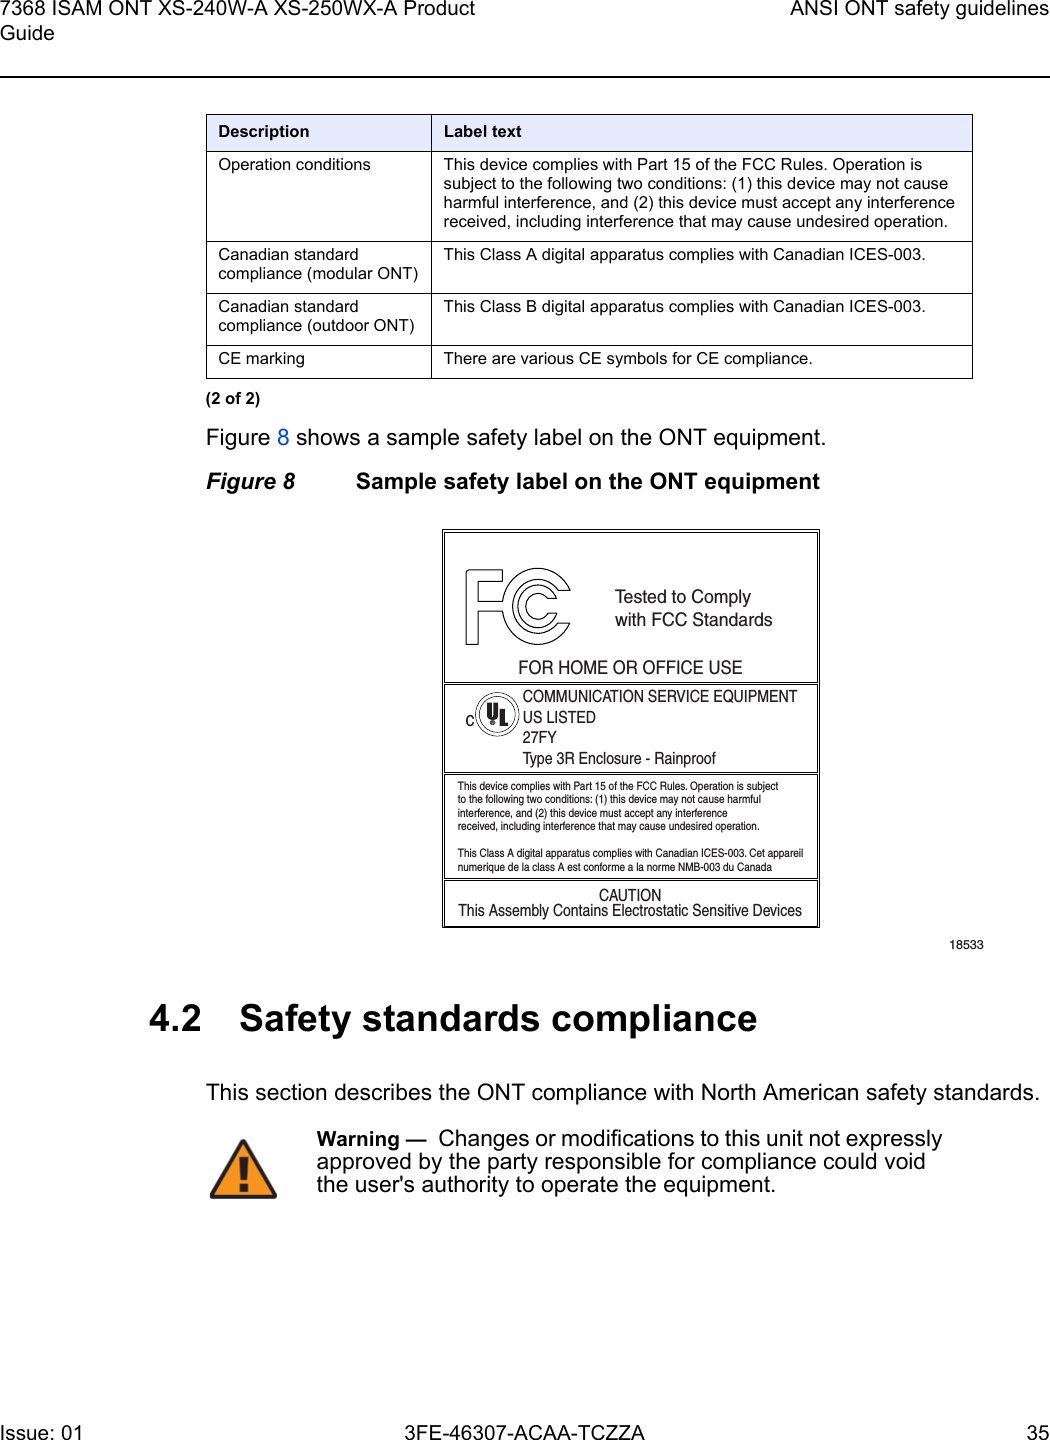 7368 ISAM ONT XS-240W-A XS-250WX-A Product GuideANSI ONT safety guidelinesIssue: 01 3FE-46307-ACAA-TCZZA 35 Figure 8 shows a sample safety label on the ONT equipment.Figure 8 Sample safety label on the ONT equipment4.2 Safety standards complianceThis section describes the ONT compliance with North American safety standards.Operation conditions This device complies with Part 15 of the FCC Rules. Operation is subject to the following two conditions: (1) this device may not cause harmful interference, and (2) this device must accept any interference received, including interference that may cause undesired operation.Canadian standard compliance (modular ONT)This Class A digital apparatus complies with Canadian ICES-003. Canadian standard compliance (outdoor ONT)This Class B digital apparatus complies with Canadian ICES-003. CE marking There are various CE symbols for CE compliance.Description Label text(2 of 2)18533This device complies with Part 15 of the FCC Rules. Operation is subjectto the following two conditions: (1) this device may not cause harmfulinterference, and (2) this device must accept any interferencereceived, including interference that may cause undesired operation.This Class A digital apparatus complies with Canadian ICES-003. Cet appareilnumerique de la class A est conforme a la norme NMB-003 du CanadaTested to Complywith FCC StandardsFOR HOME OR OFFICE USECOMMUNICATION SERVICE EQUIPMENTUS LISTED27FYType 3R Enclosure - RainproofCAUTIONThis Assembly Contains Electrostatic Sensitive Devicesc®Warning —  Changes or modifications to this unit not expressly approved by the party responsible for compliance could void the user&apos;s authority to operate the equipment.